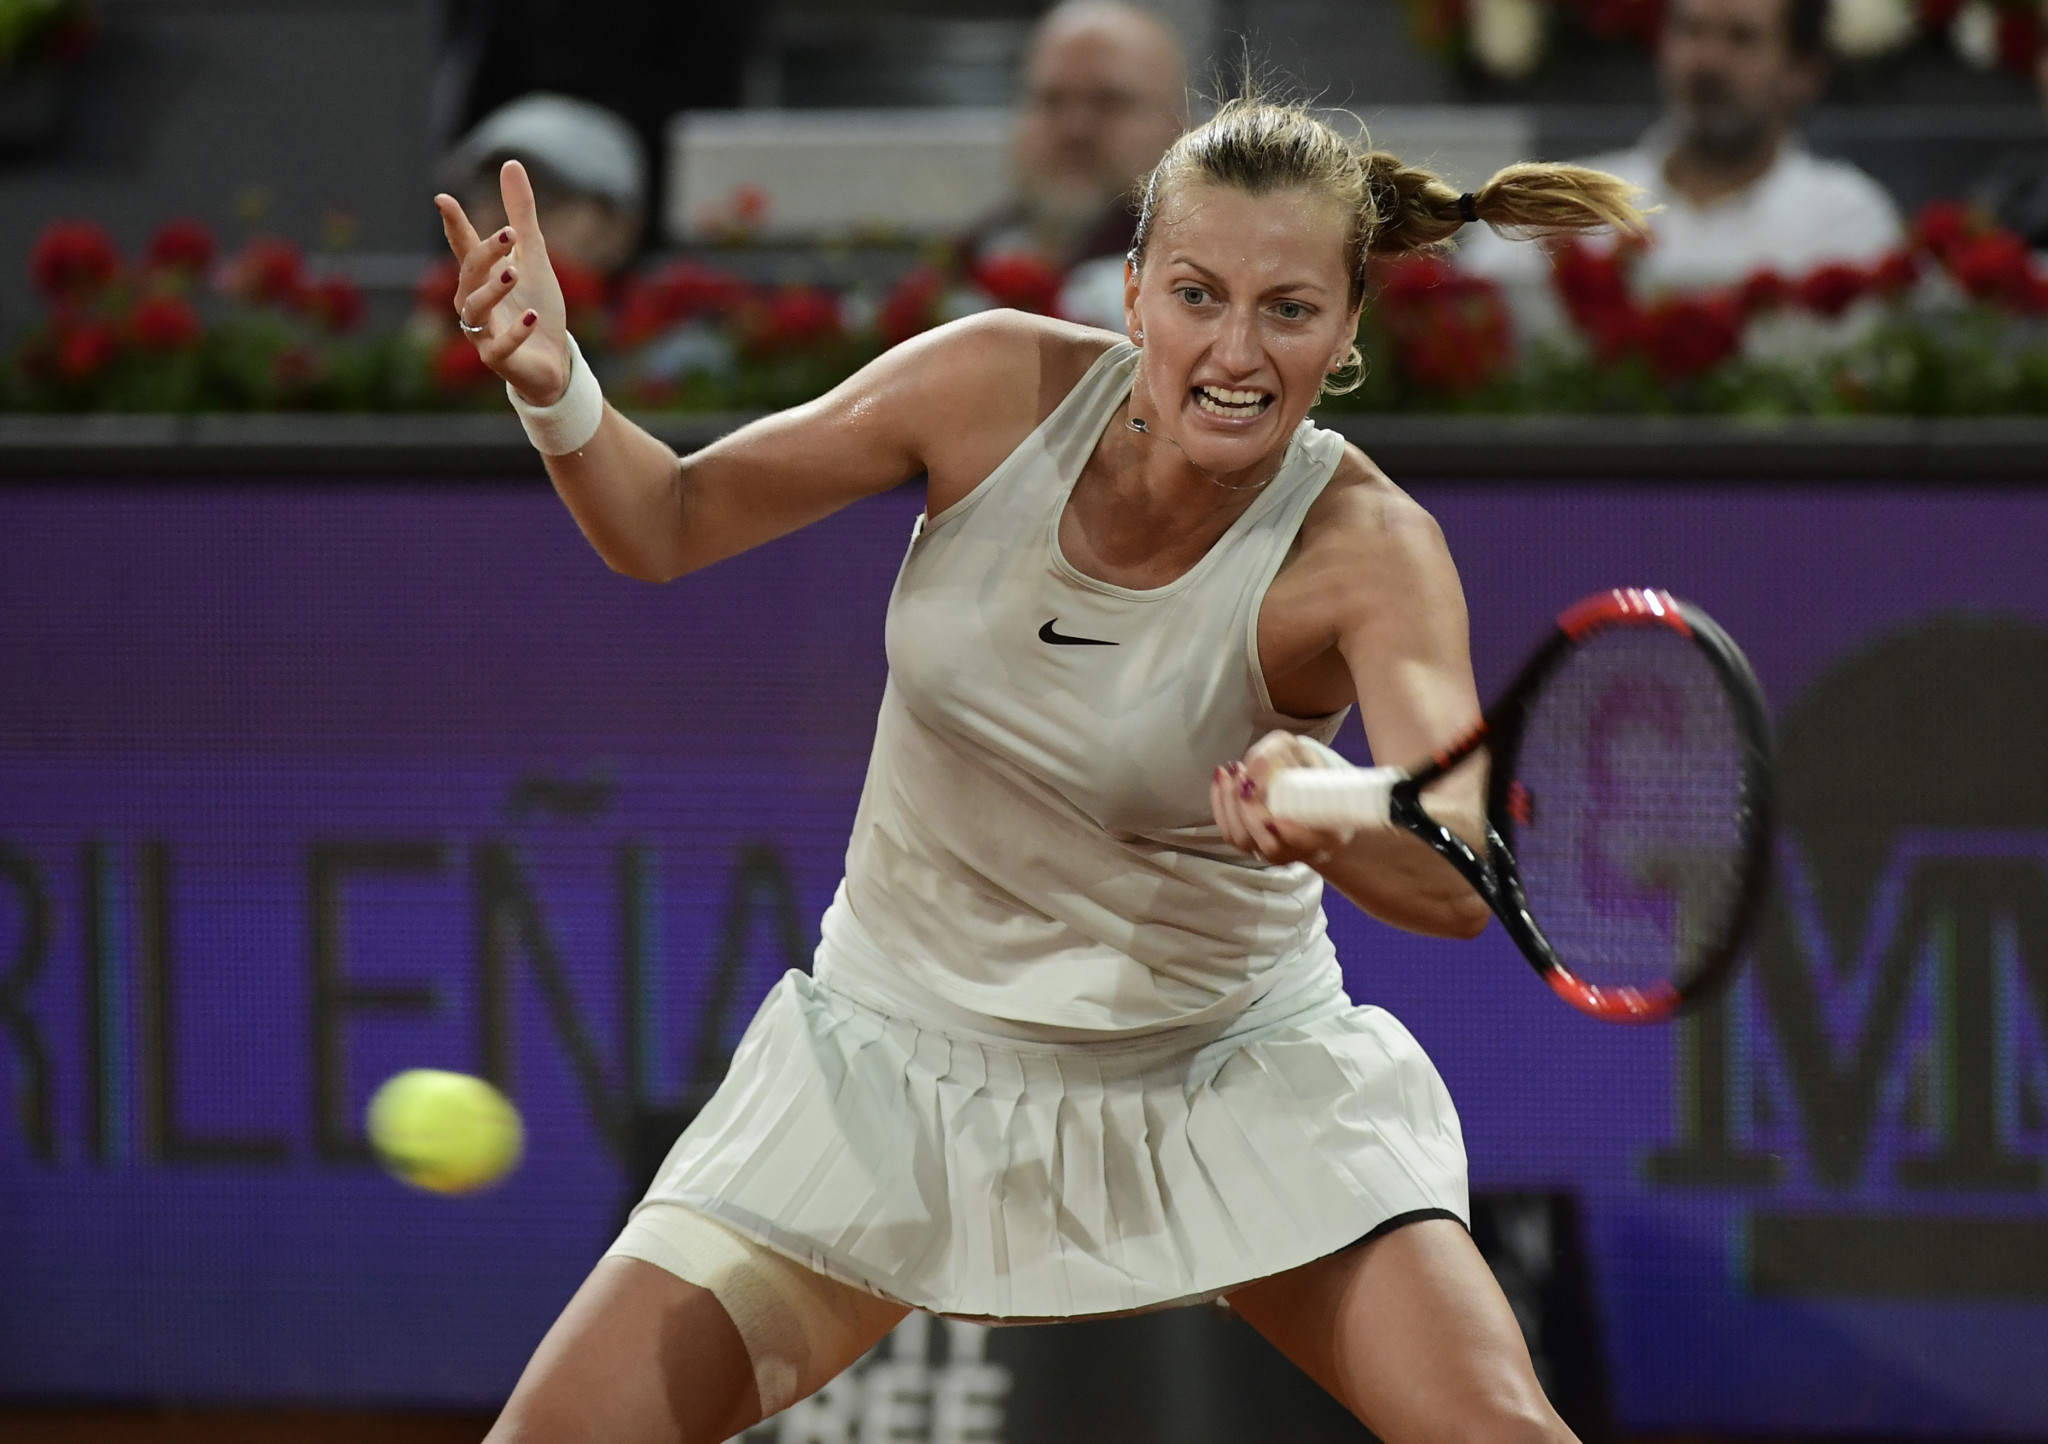 Kvitová clinches record third title with victory over Bertens at Mutua Madrid Open